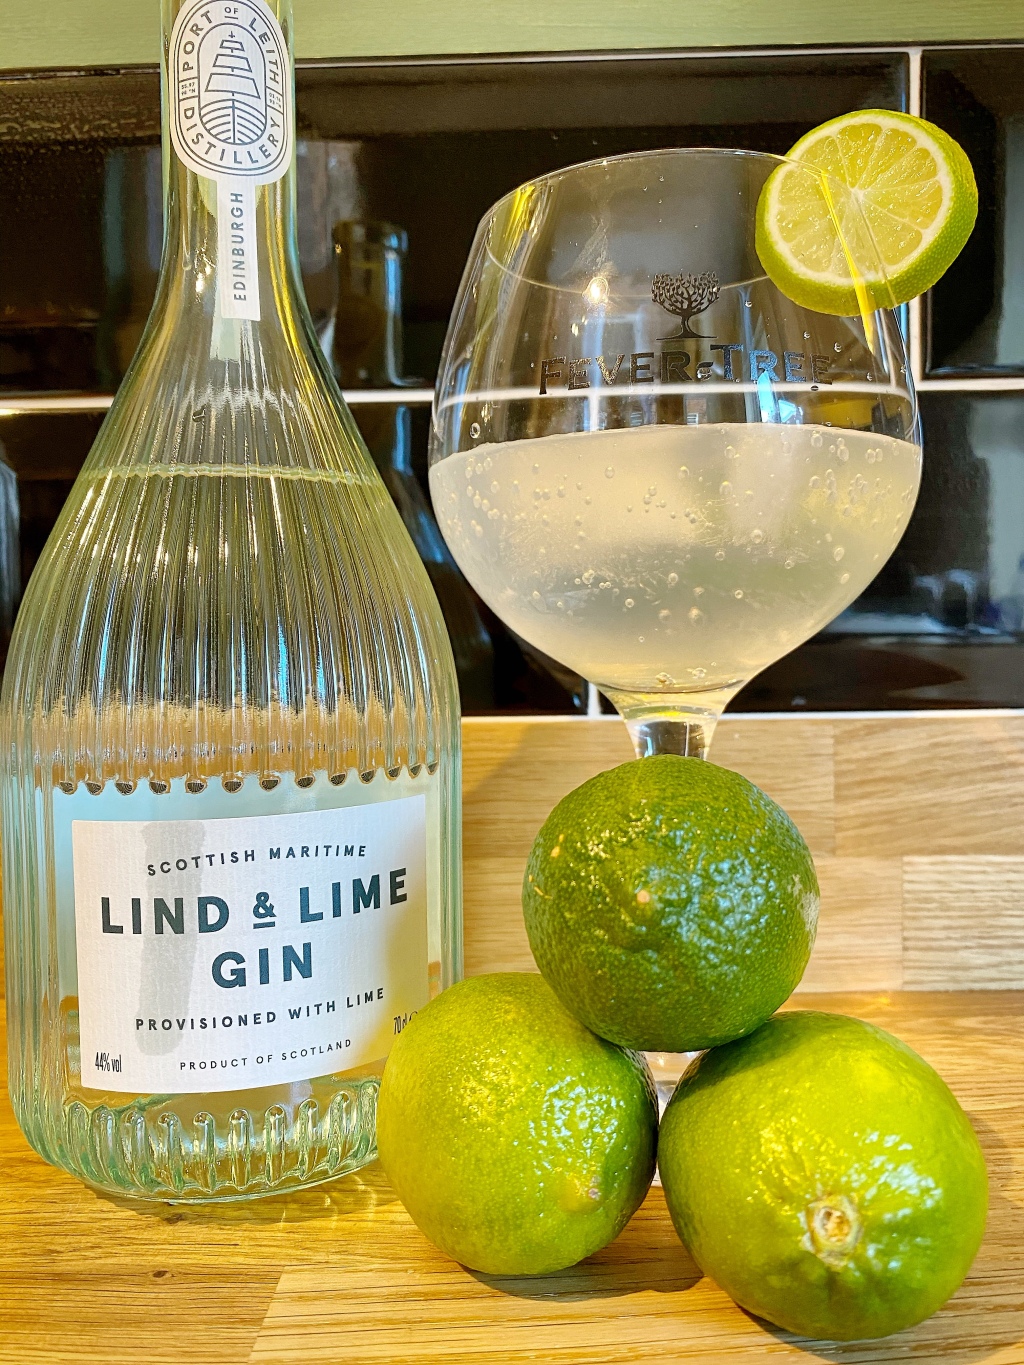 Gin Review – Lind and Lime